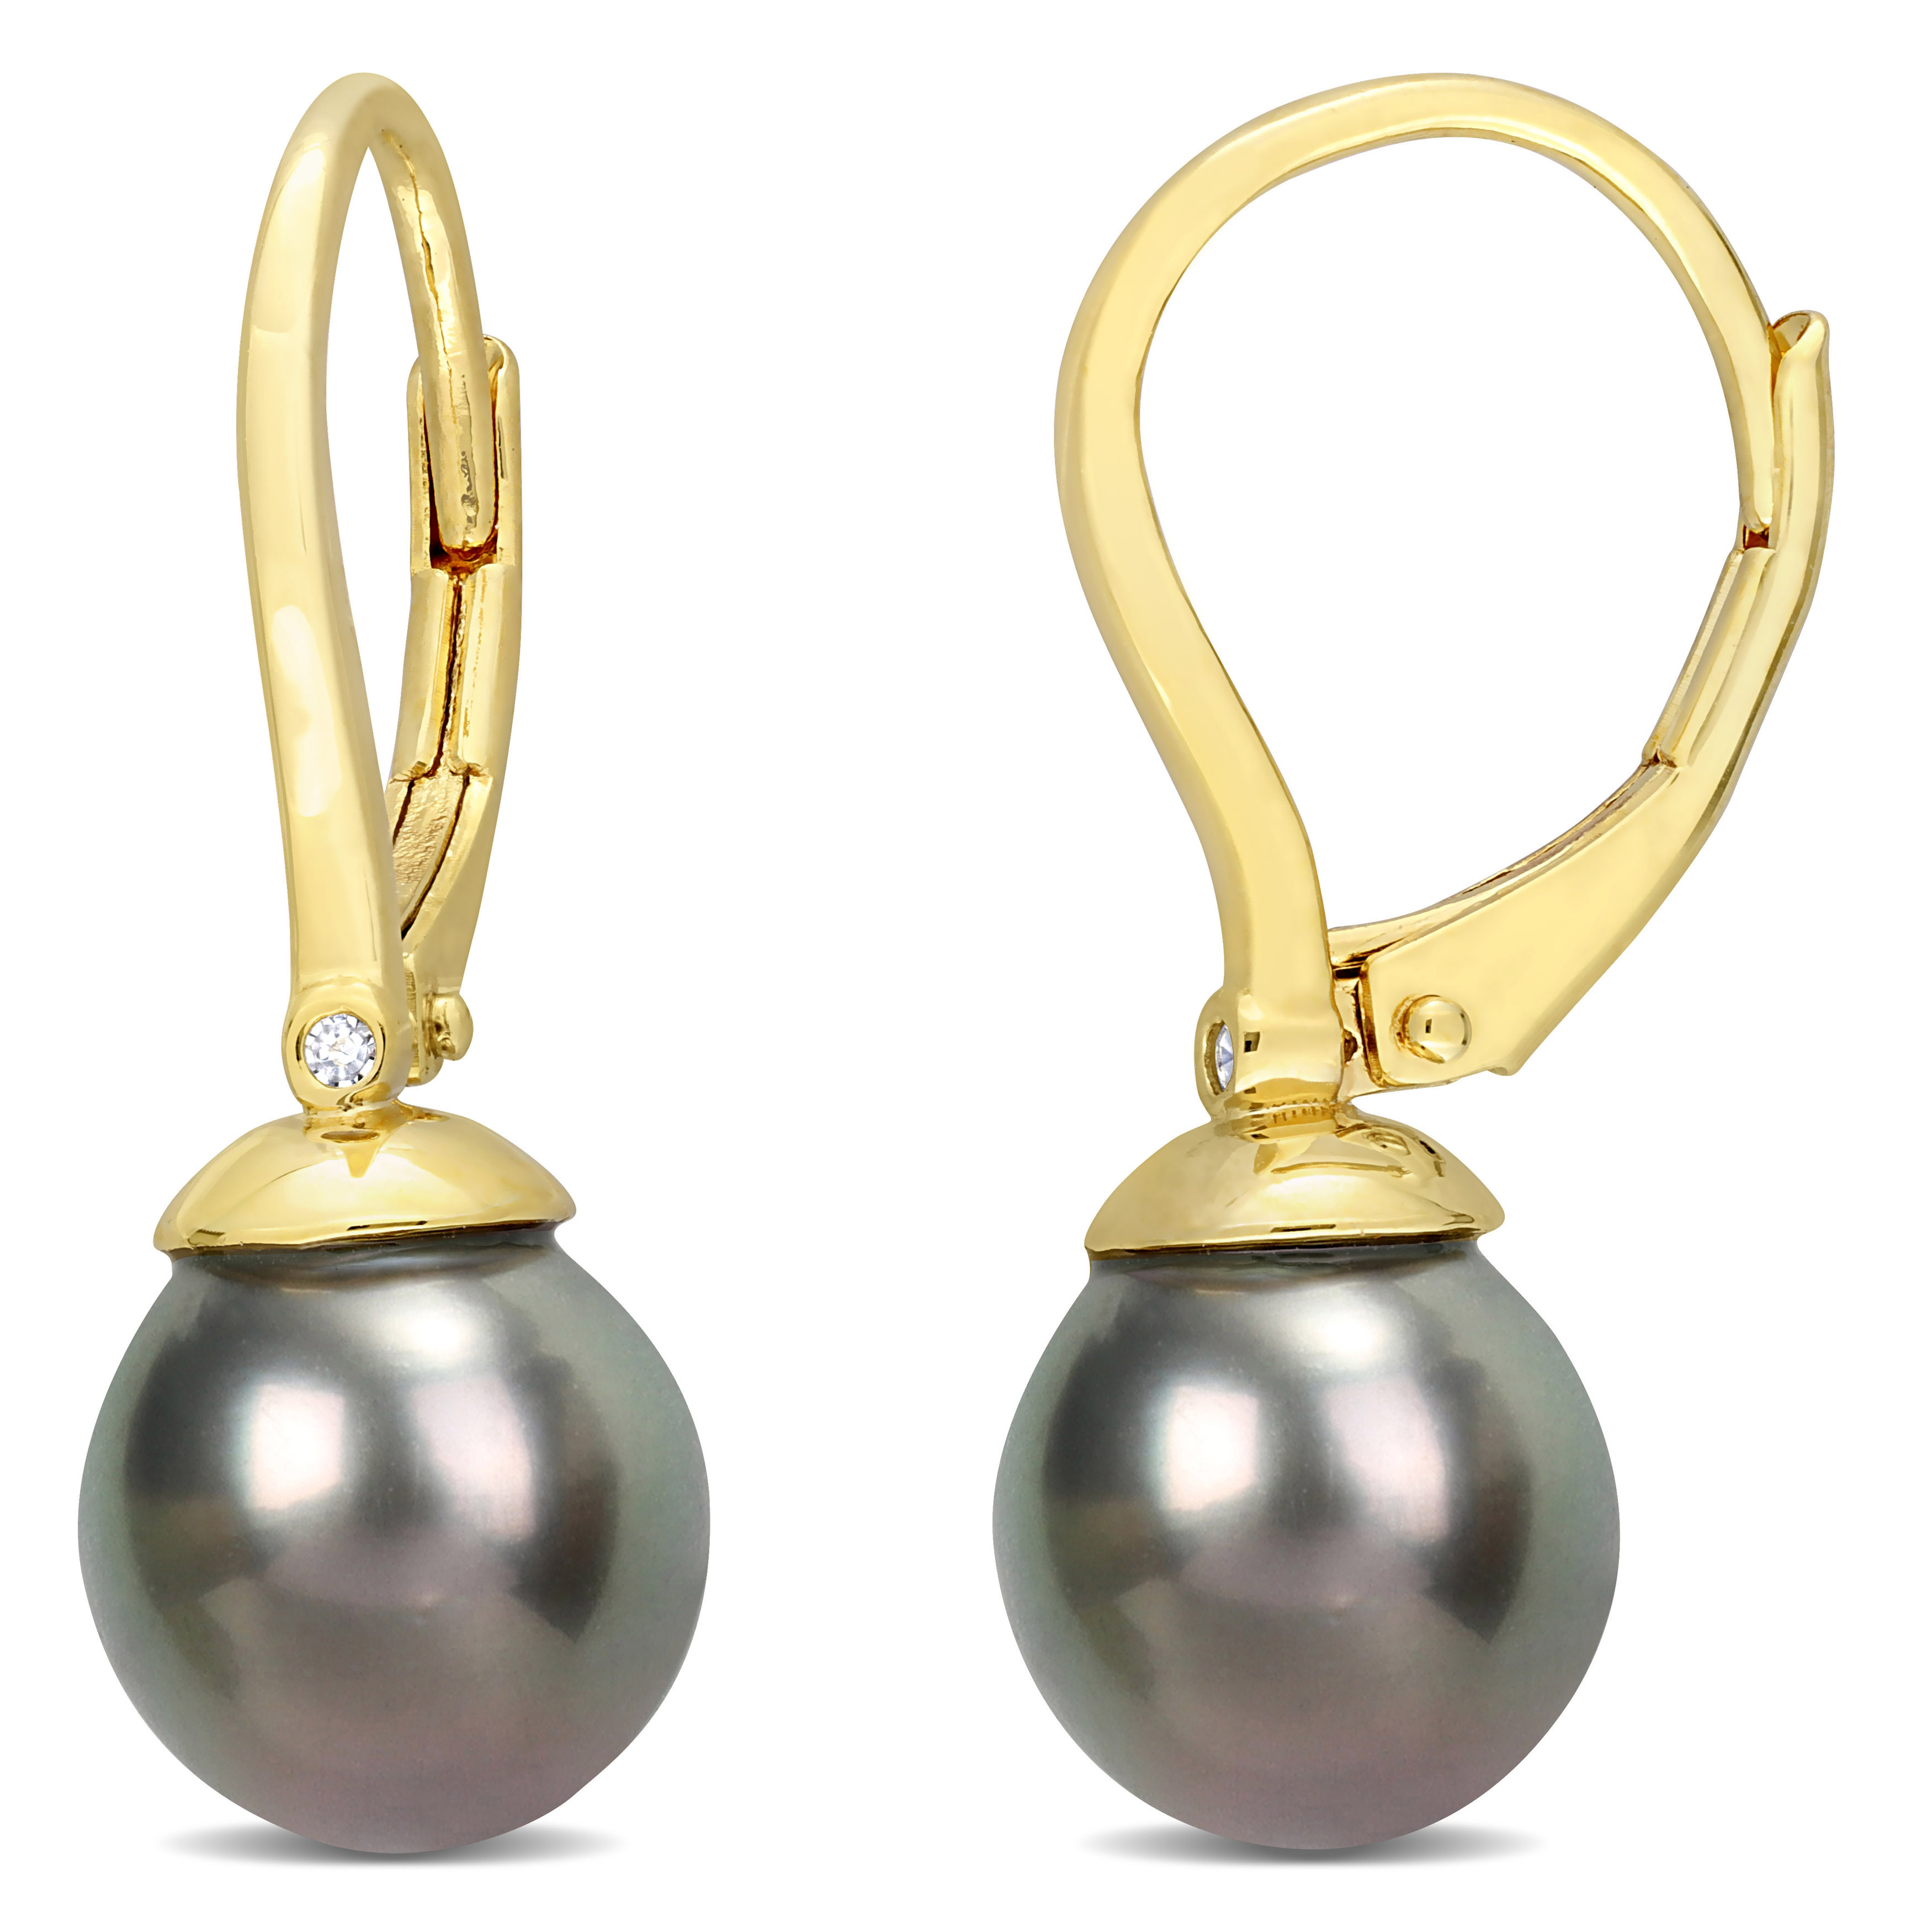 8-8.5 MM Black Tahitian Cultured Pearl & Diamond Accent Leverback Earrings in Yellow Plated Sterling Silver